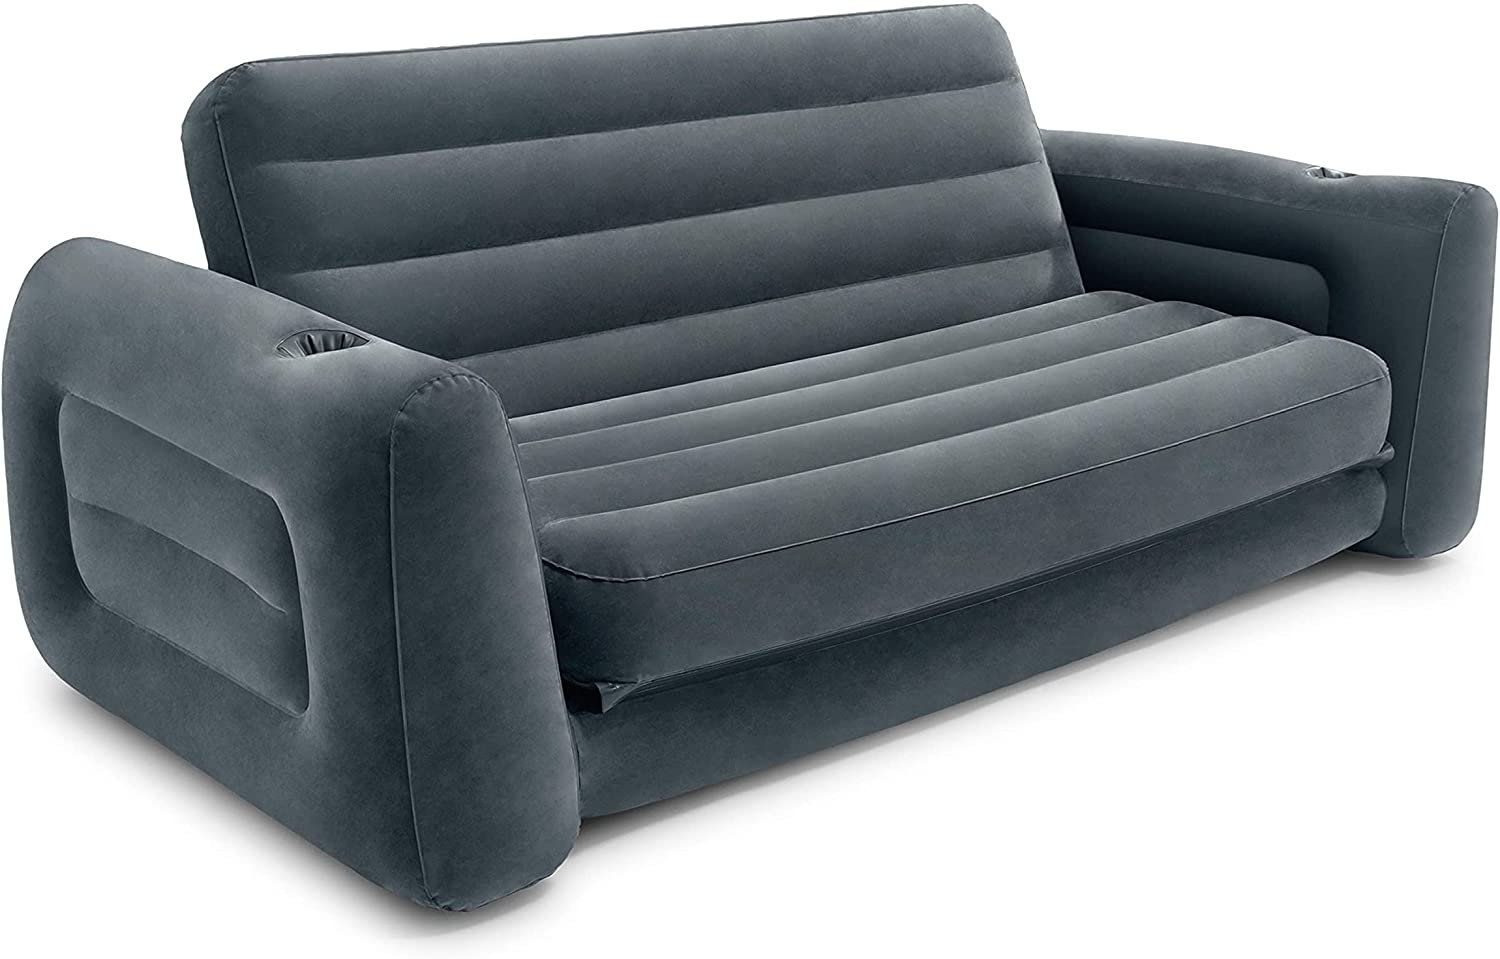 Intex-Pull-out-Sofa-Inflatable-Bed—An-Inflatable-Couch-That-Turns-Into-A-Queen-Bed